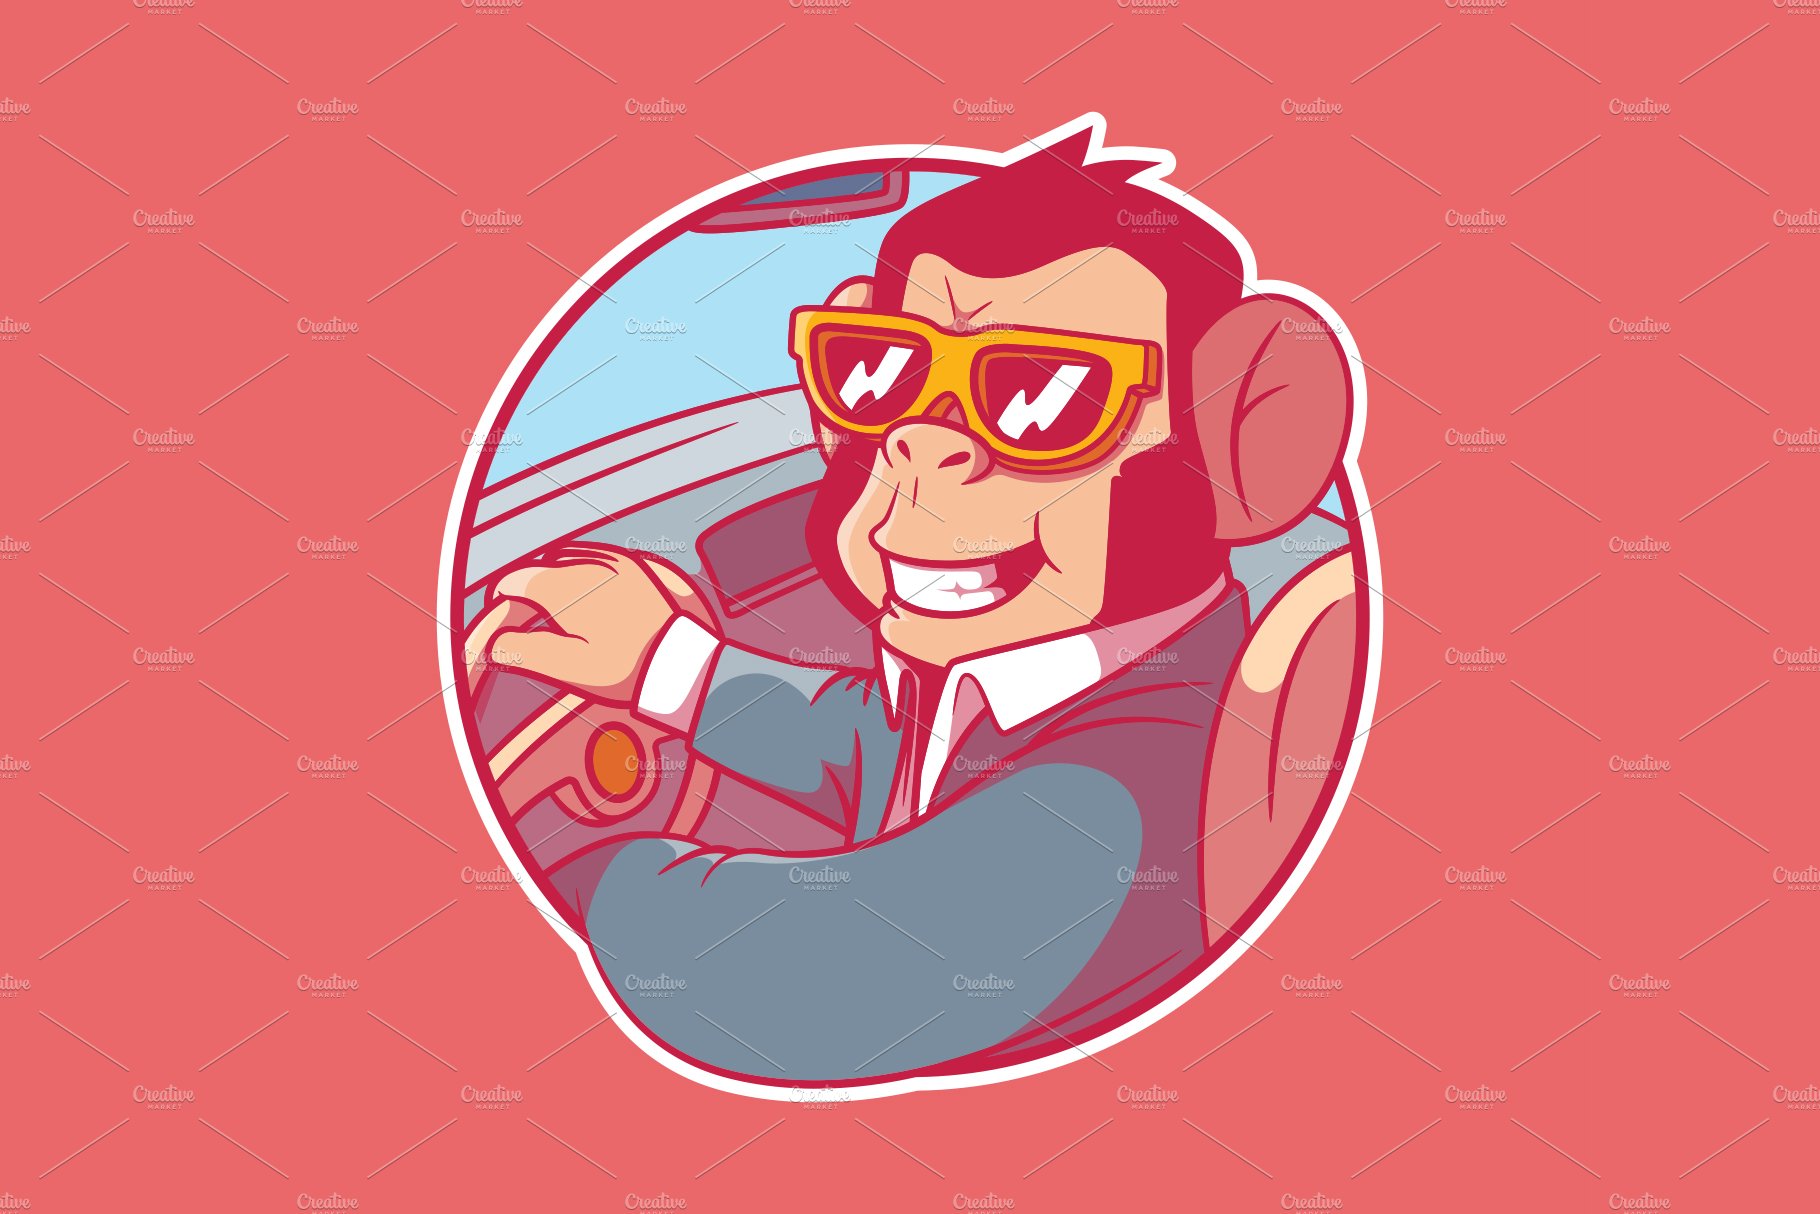 Driving Monkey! cover image.